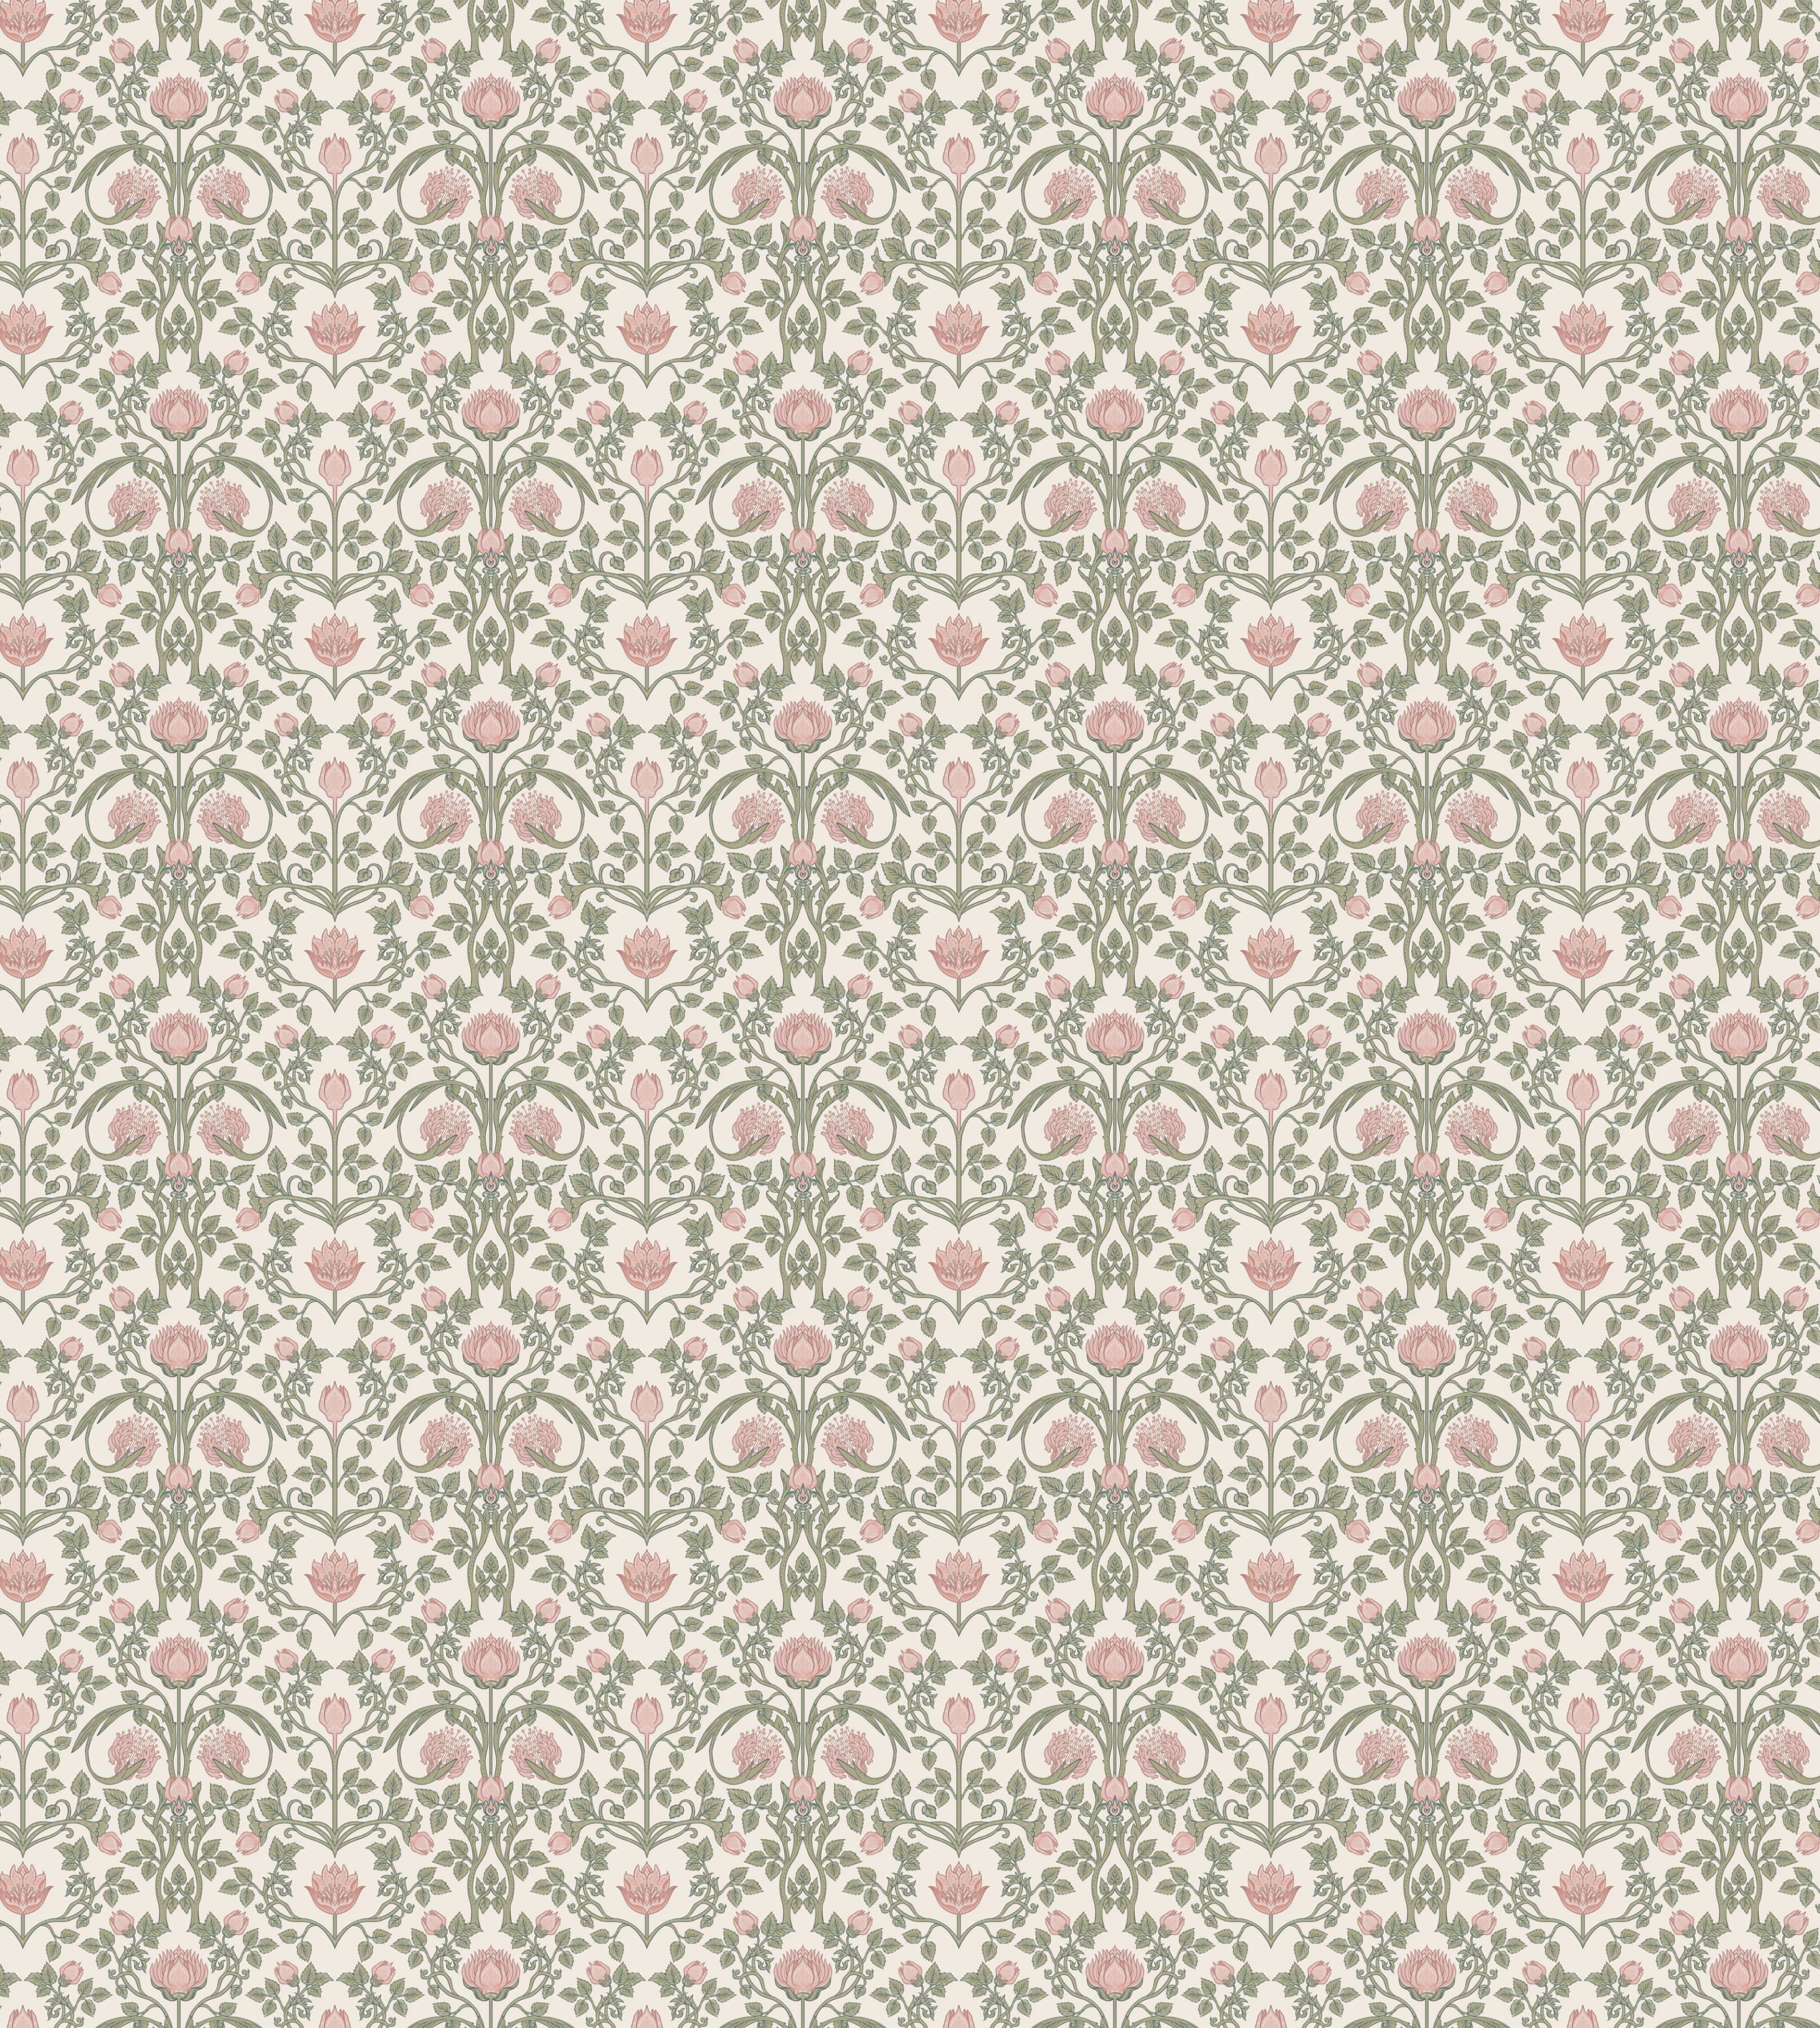 A detailed view of the pastel floral damask wallpaper pattern, featuring soft pink blooms and green foliage on a light background.